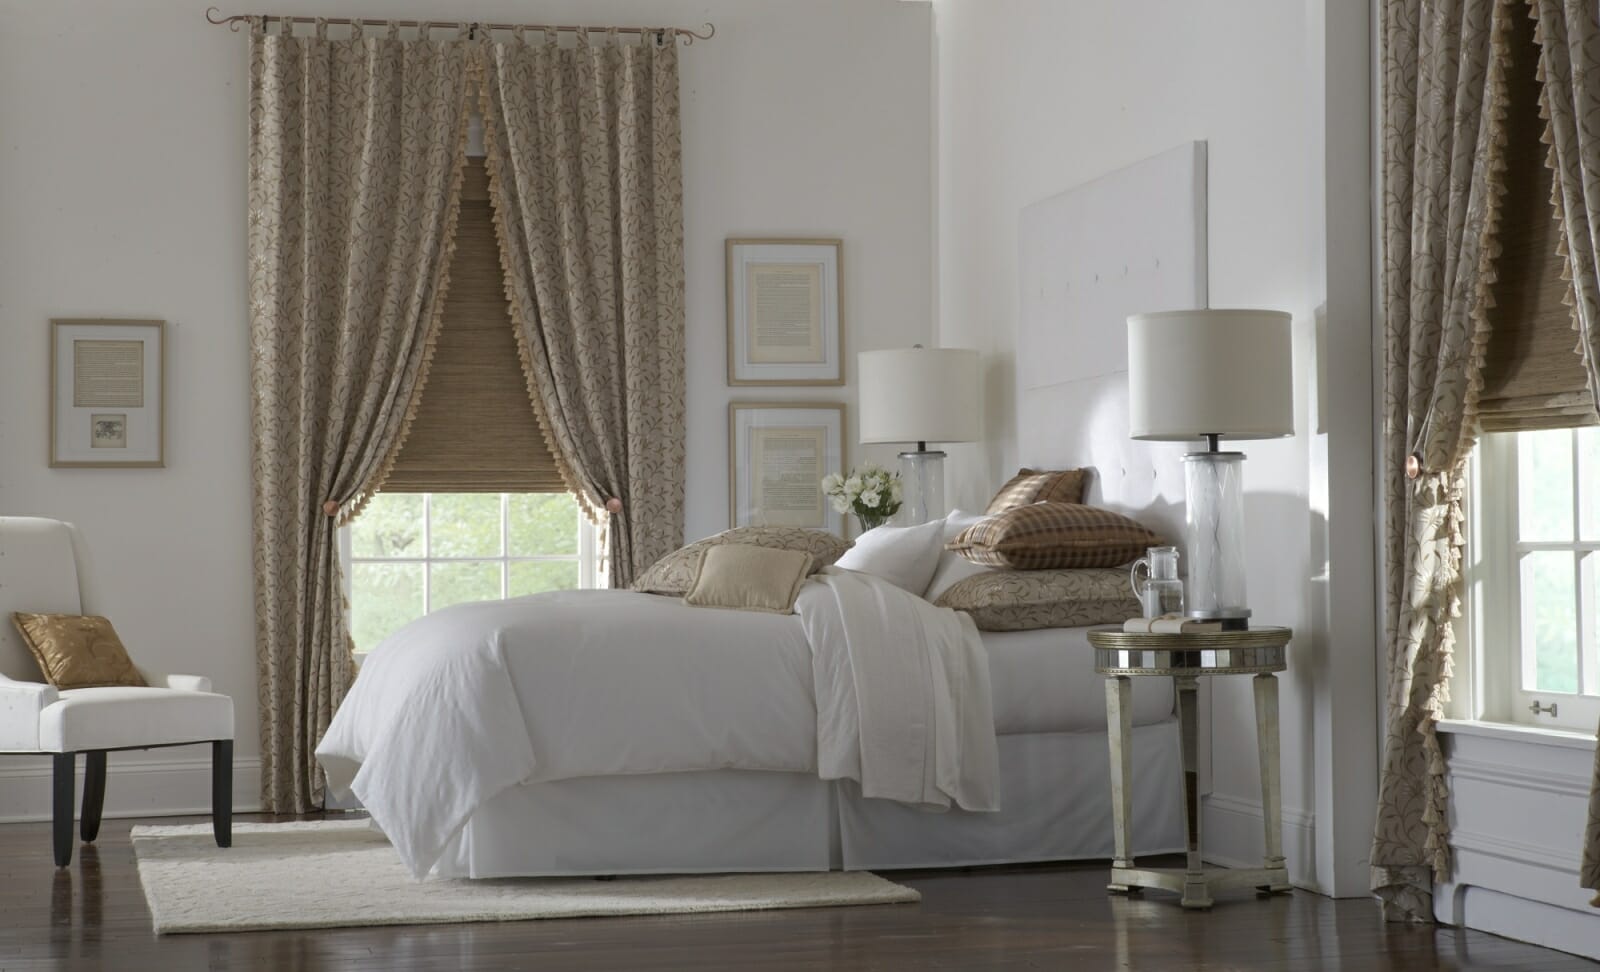 Window Treatment Ideas for the Bedroom - 3 Blind Mice